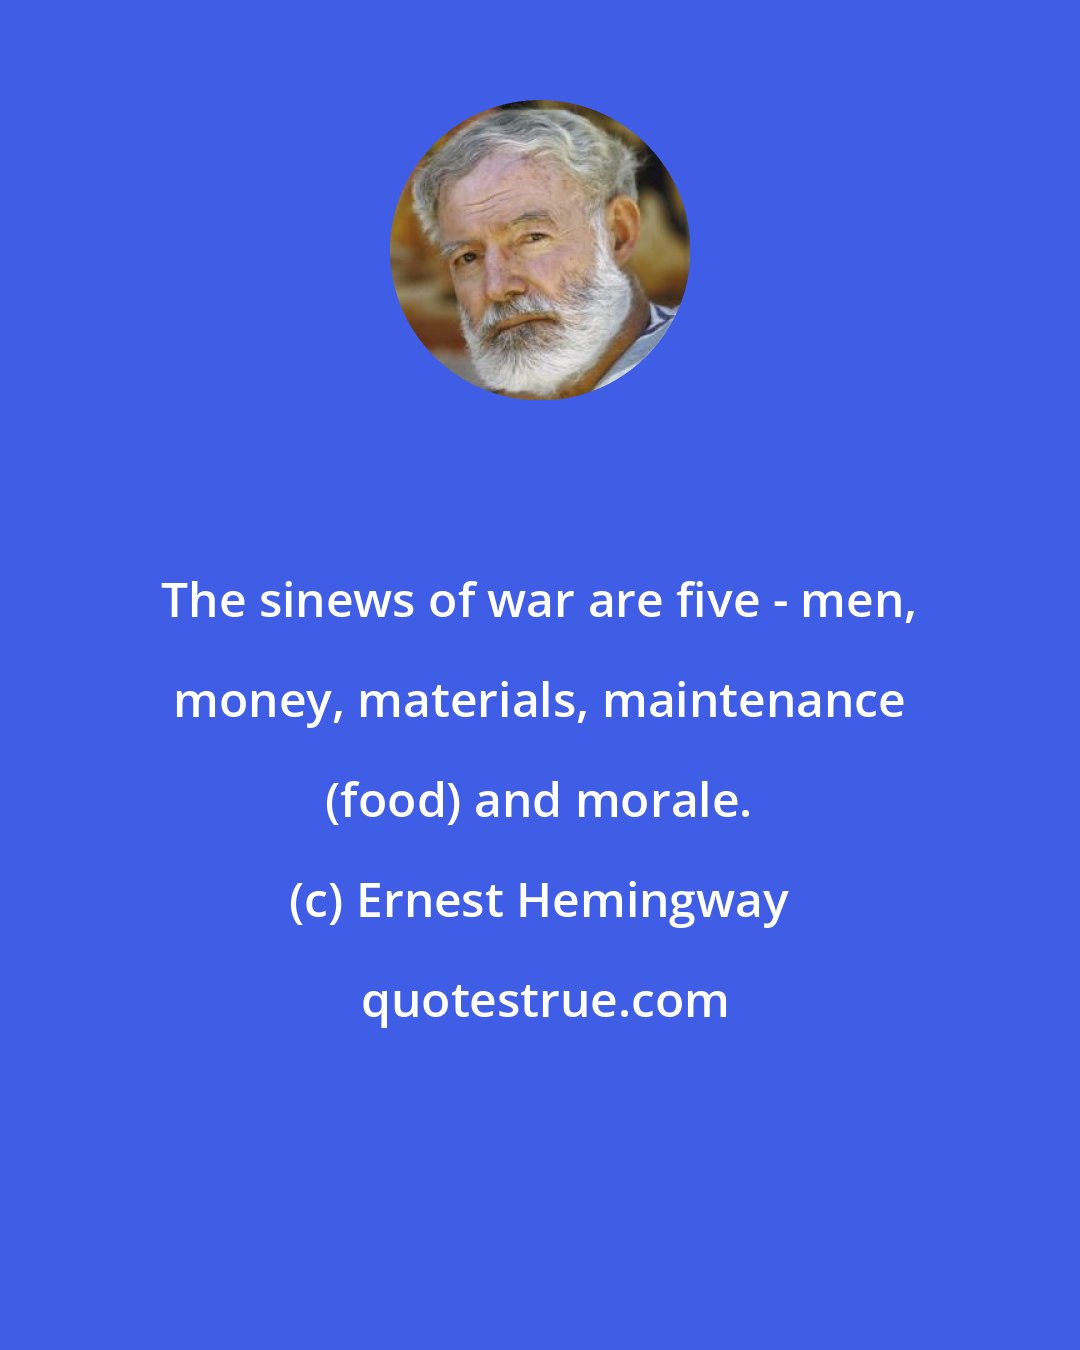 Ernest Hemingway: The sinews of war are five - men, money, materials, maintenance (food) and morale.